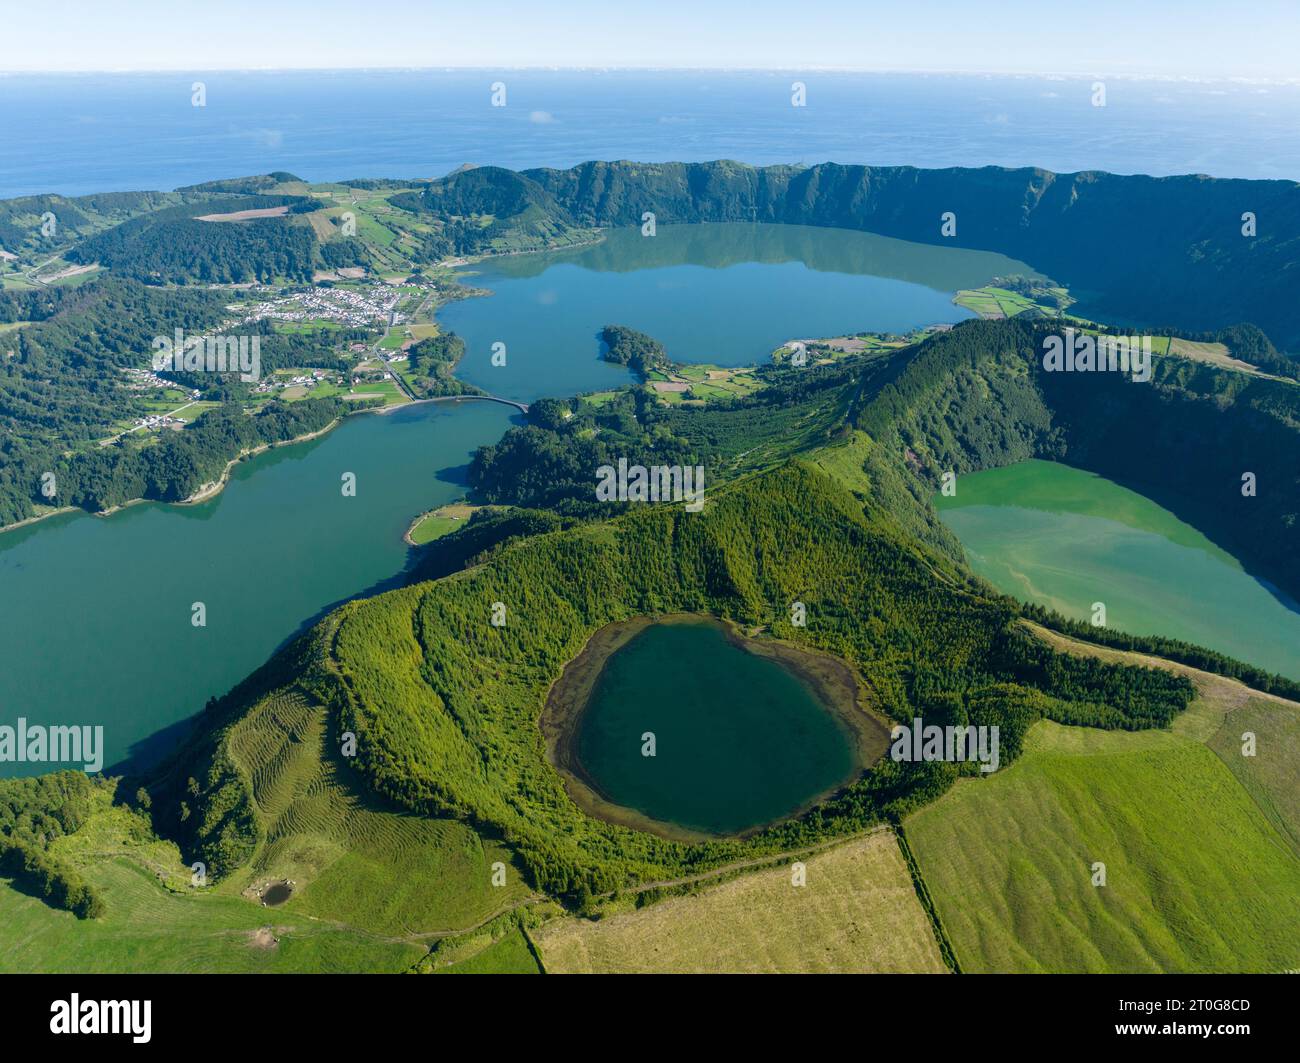 The view from the Miradouro da Vista do Rei viewpoint over Sete Cidades lakes in the Sao Miguel island in the Azores, Portugal Stock Photo